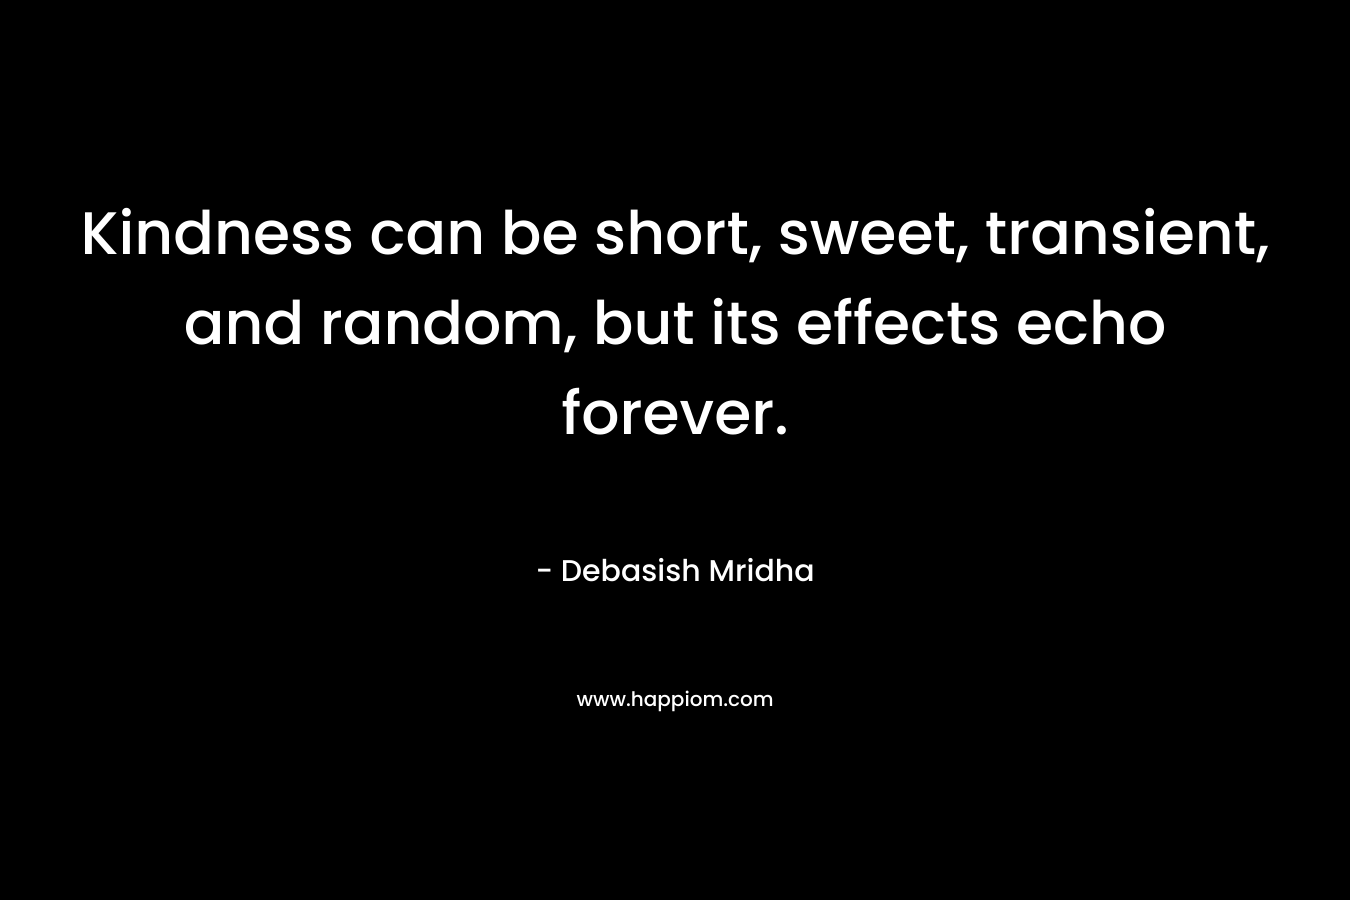 Kindness can be short, sweet, transient, and random, but its effects echo forever.